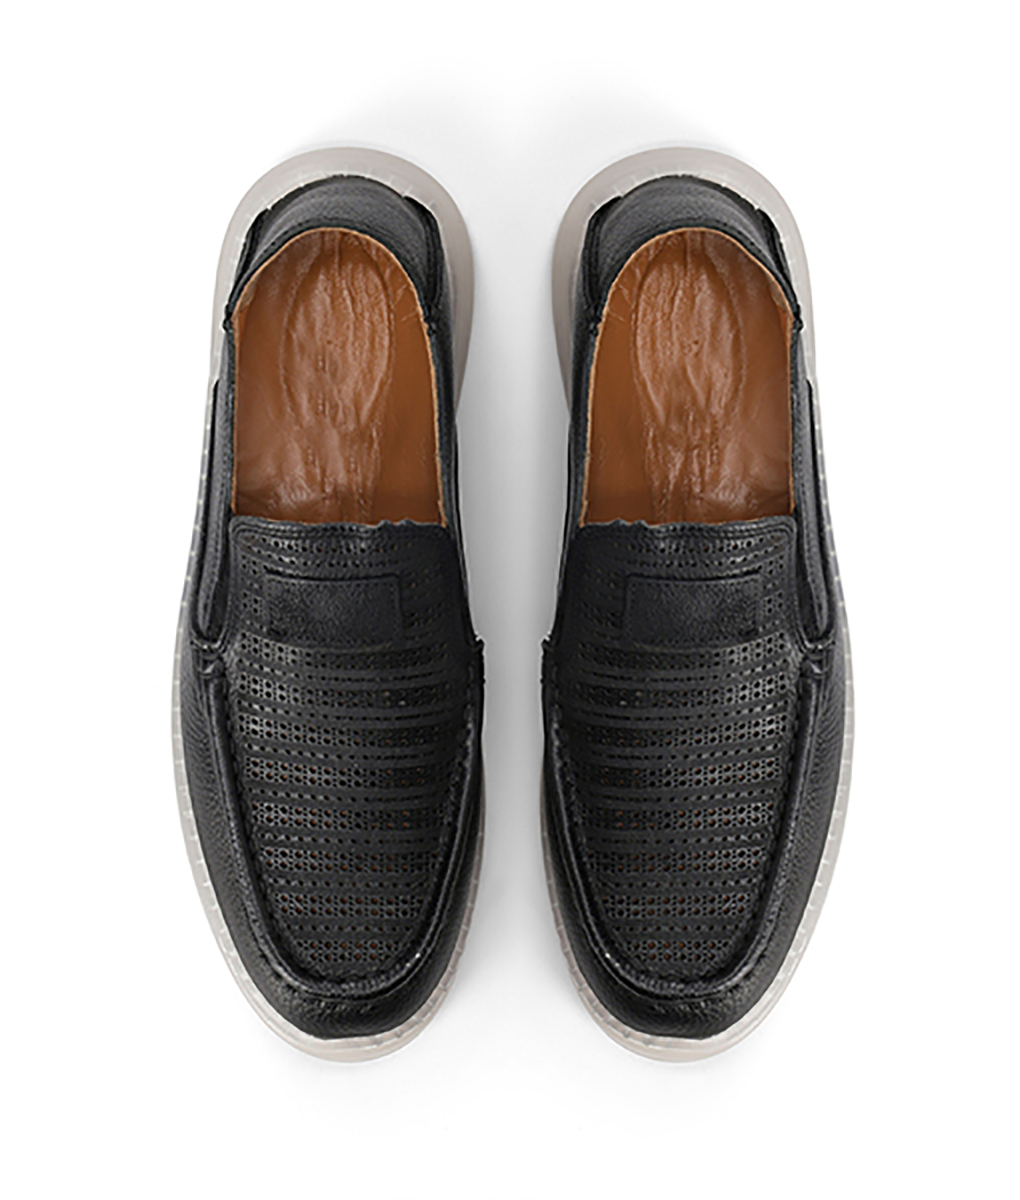 Men's Dotted Black Leather Loafers